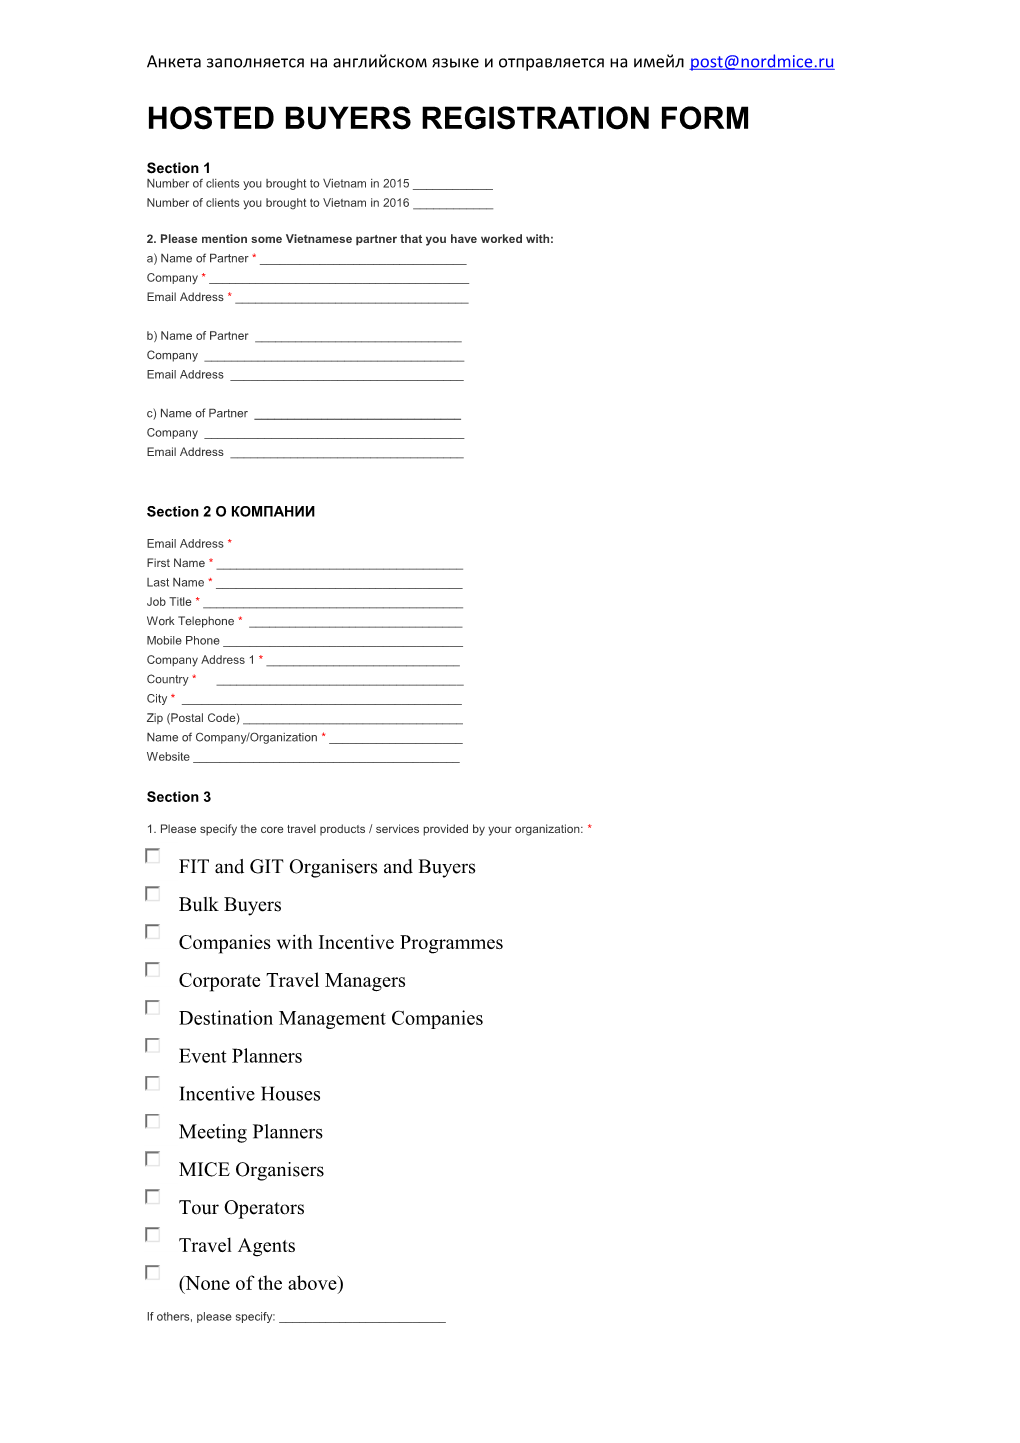 Hosted Buyers Registration Form